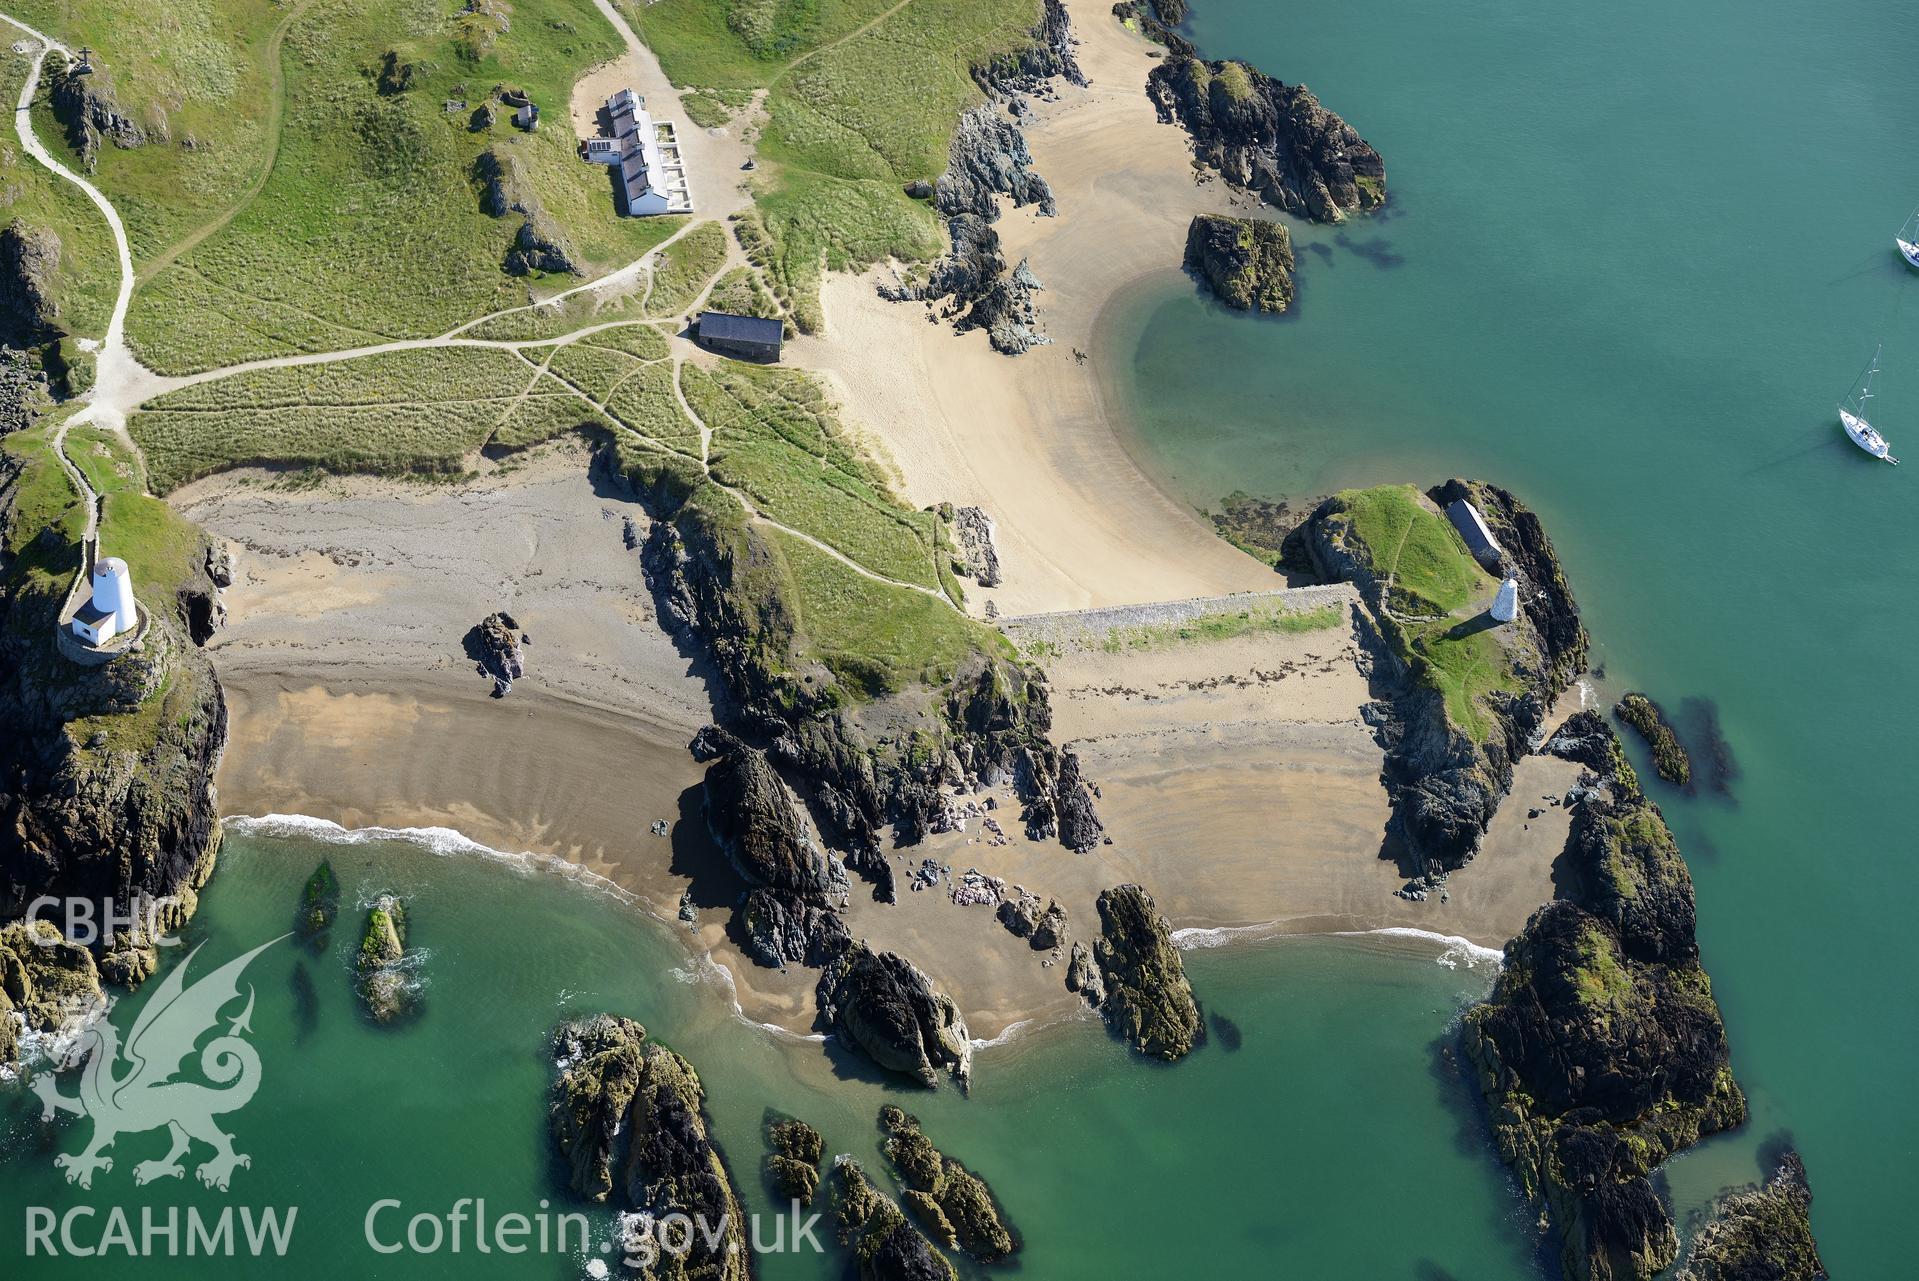 The lighthouse, tower, and pilot's house on Llanddwyn Island. Oblique aerial photograph taken during the Royal Commission's programme of archaeological aerial reconnaissance by Toby Driver on 23rd June 2015.